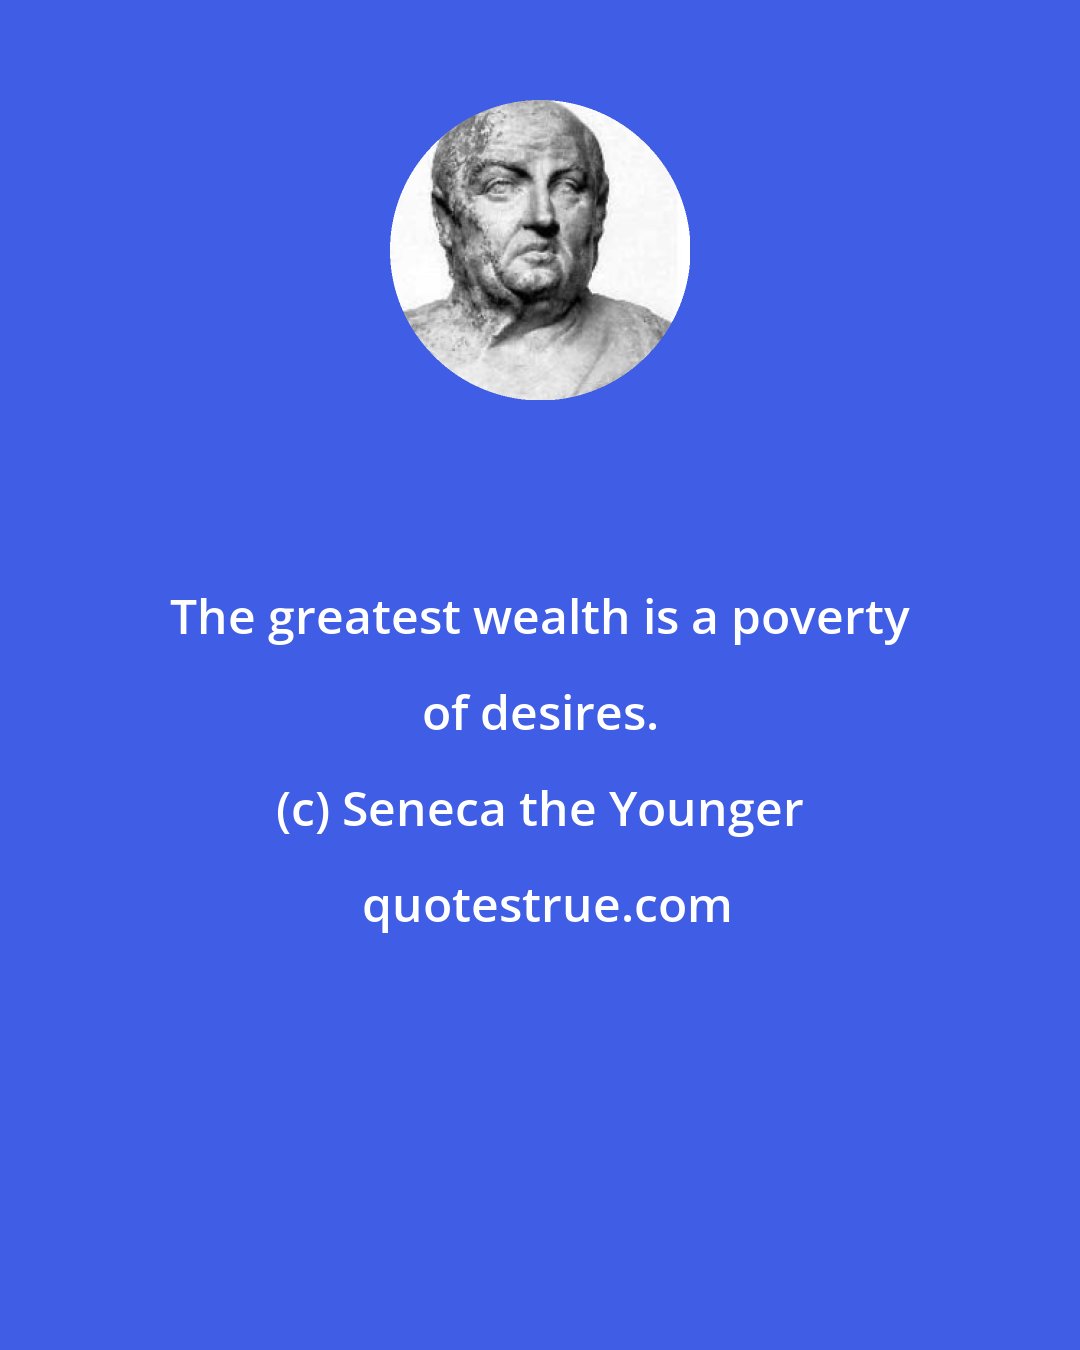 Seneca the Younger: The greatest wealth is a poverty of desires.